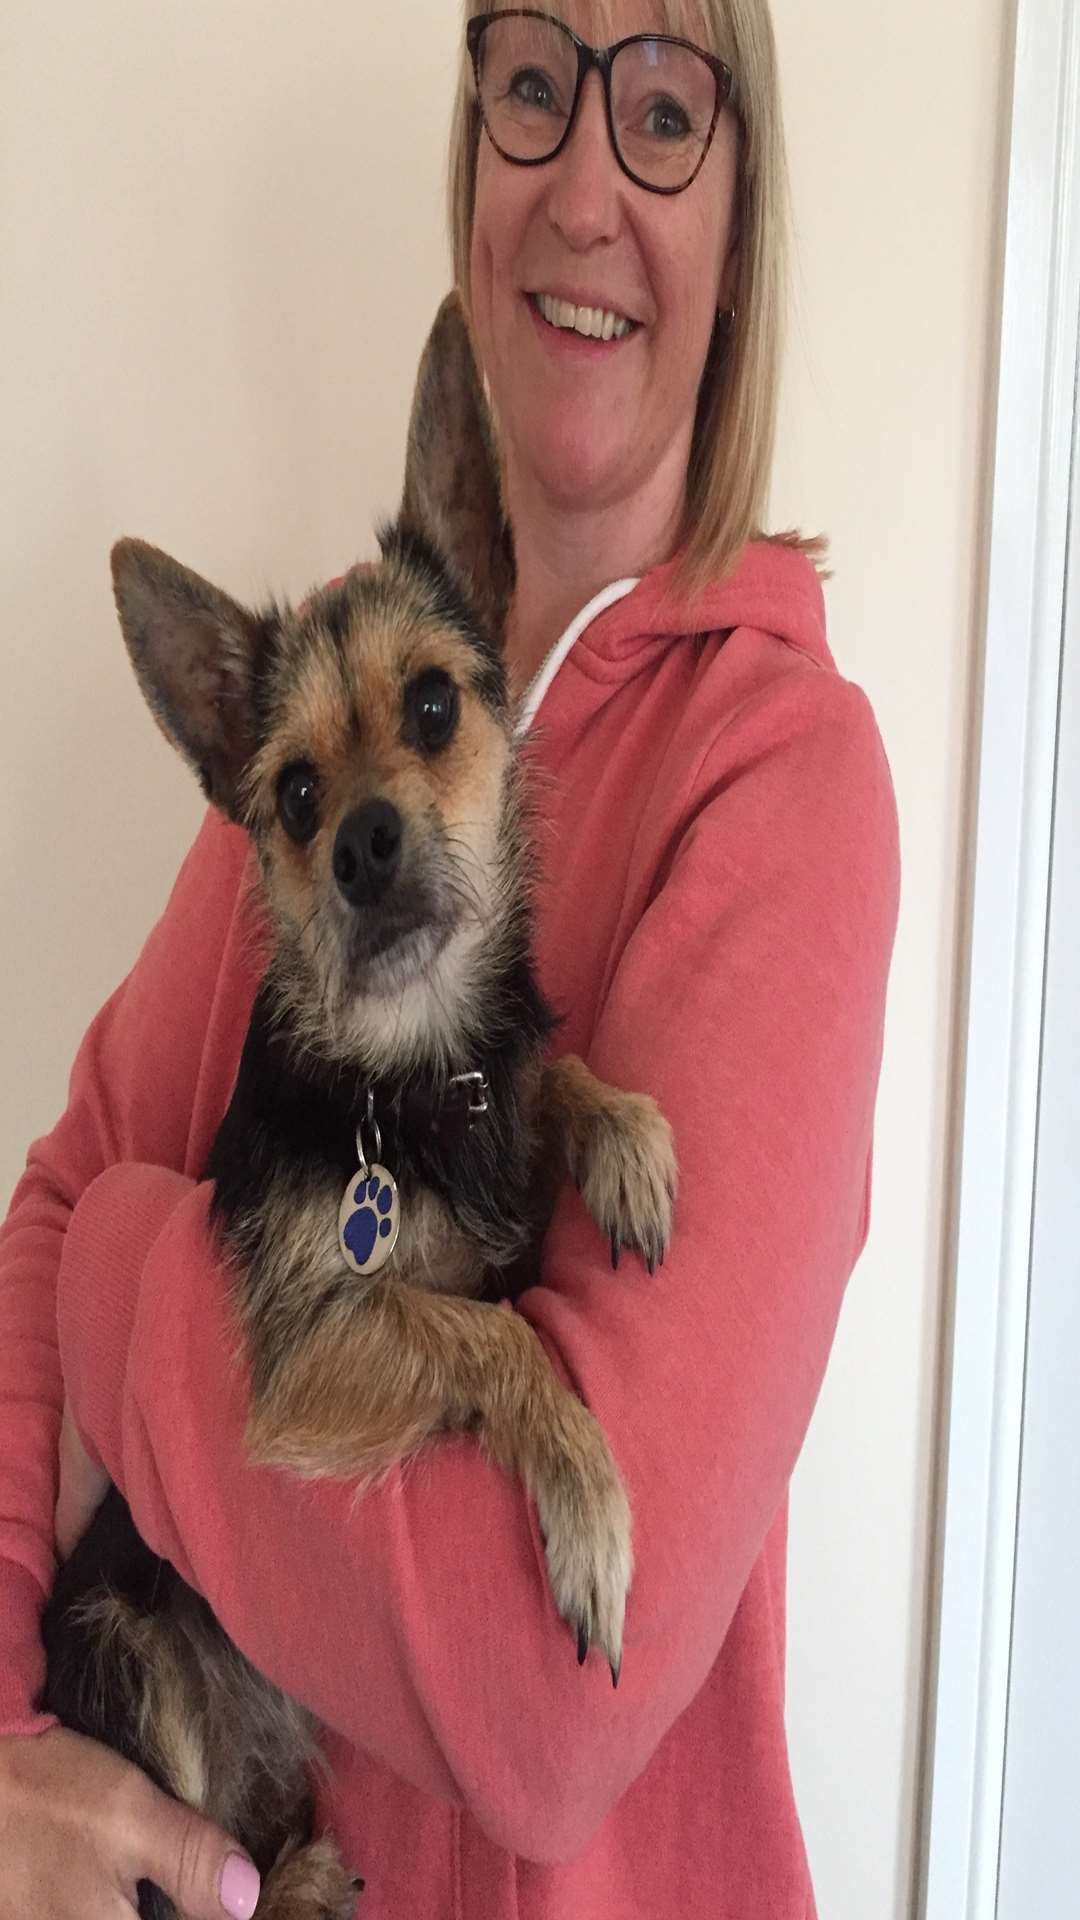 Zoe Doughty reunited with her missing dog Coco after seven weeks